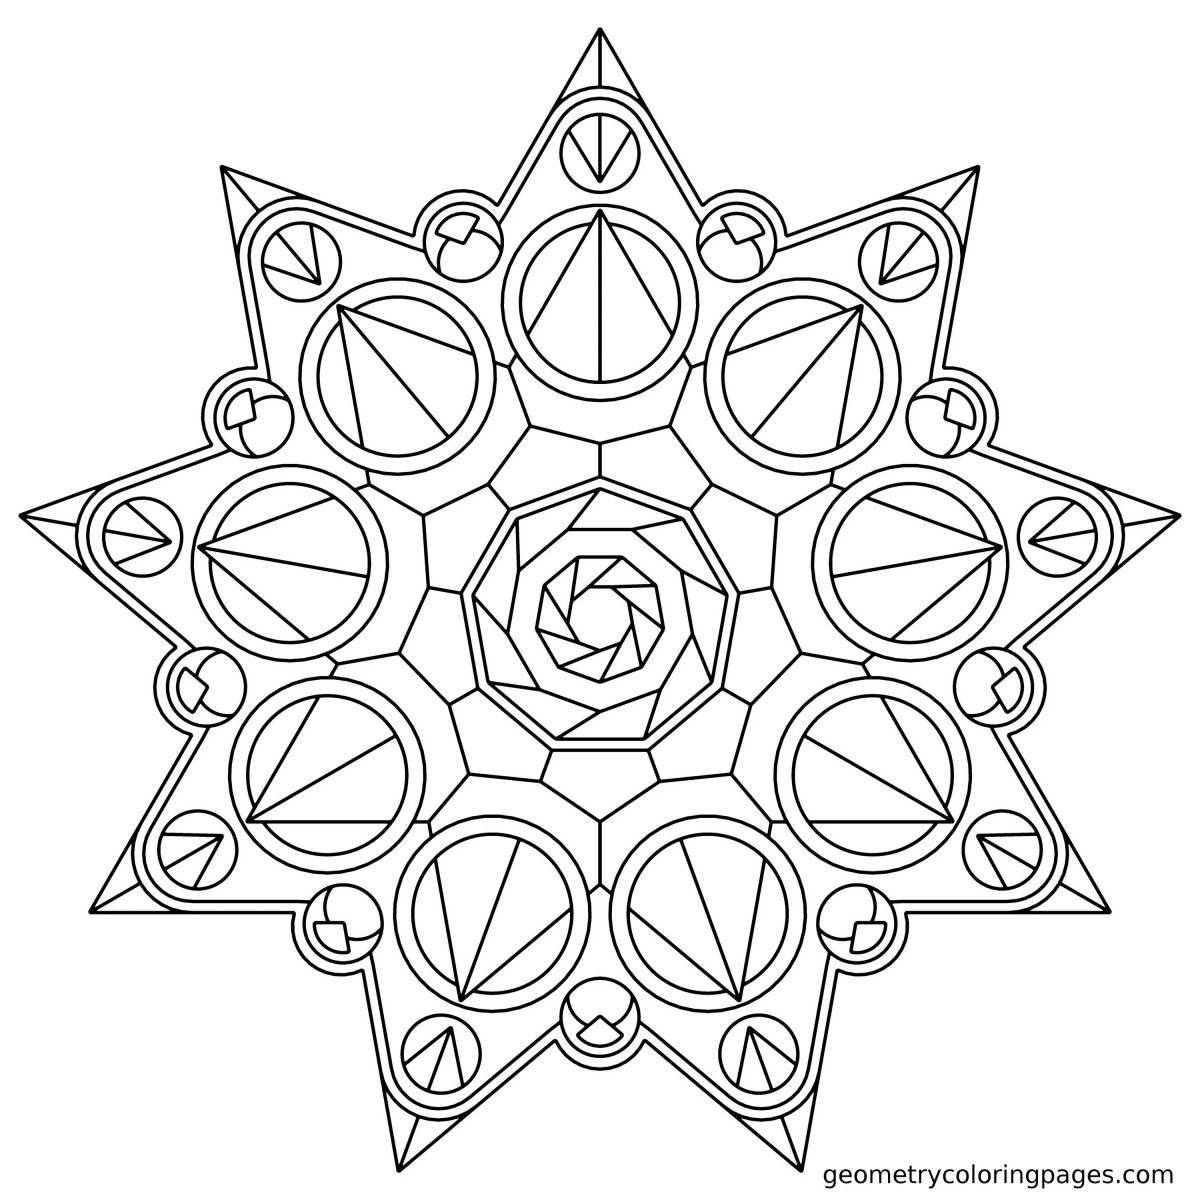 Coloring page with stylish geometric pattern